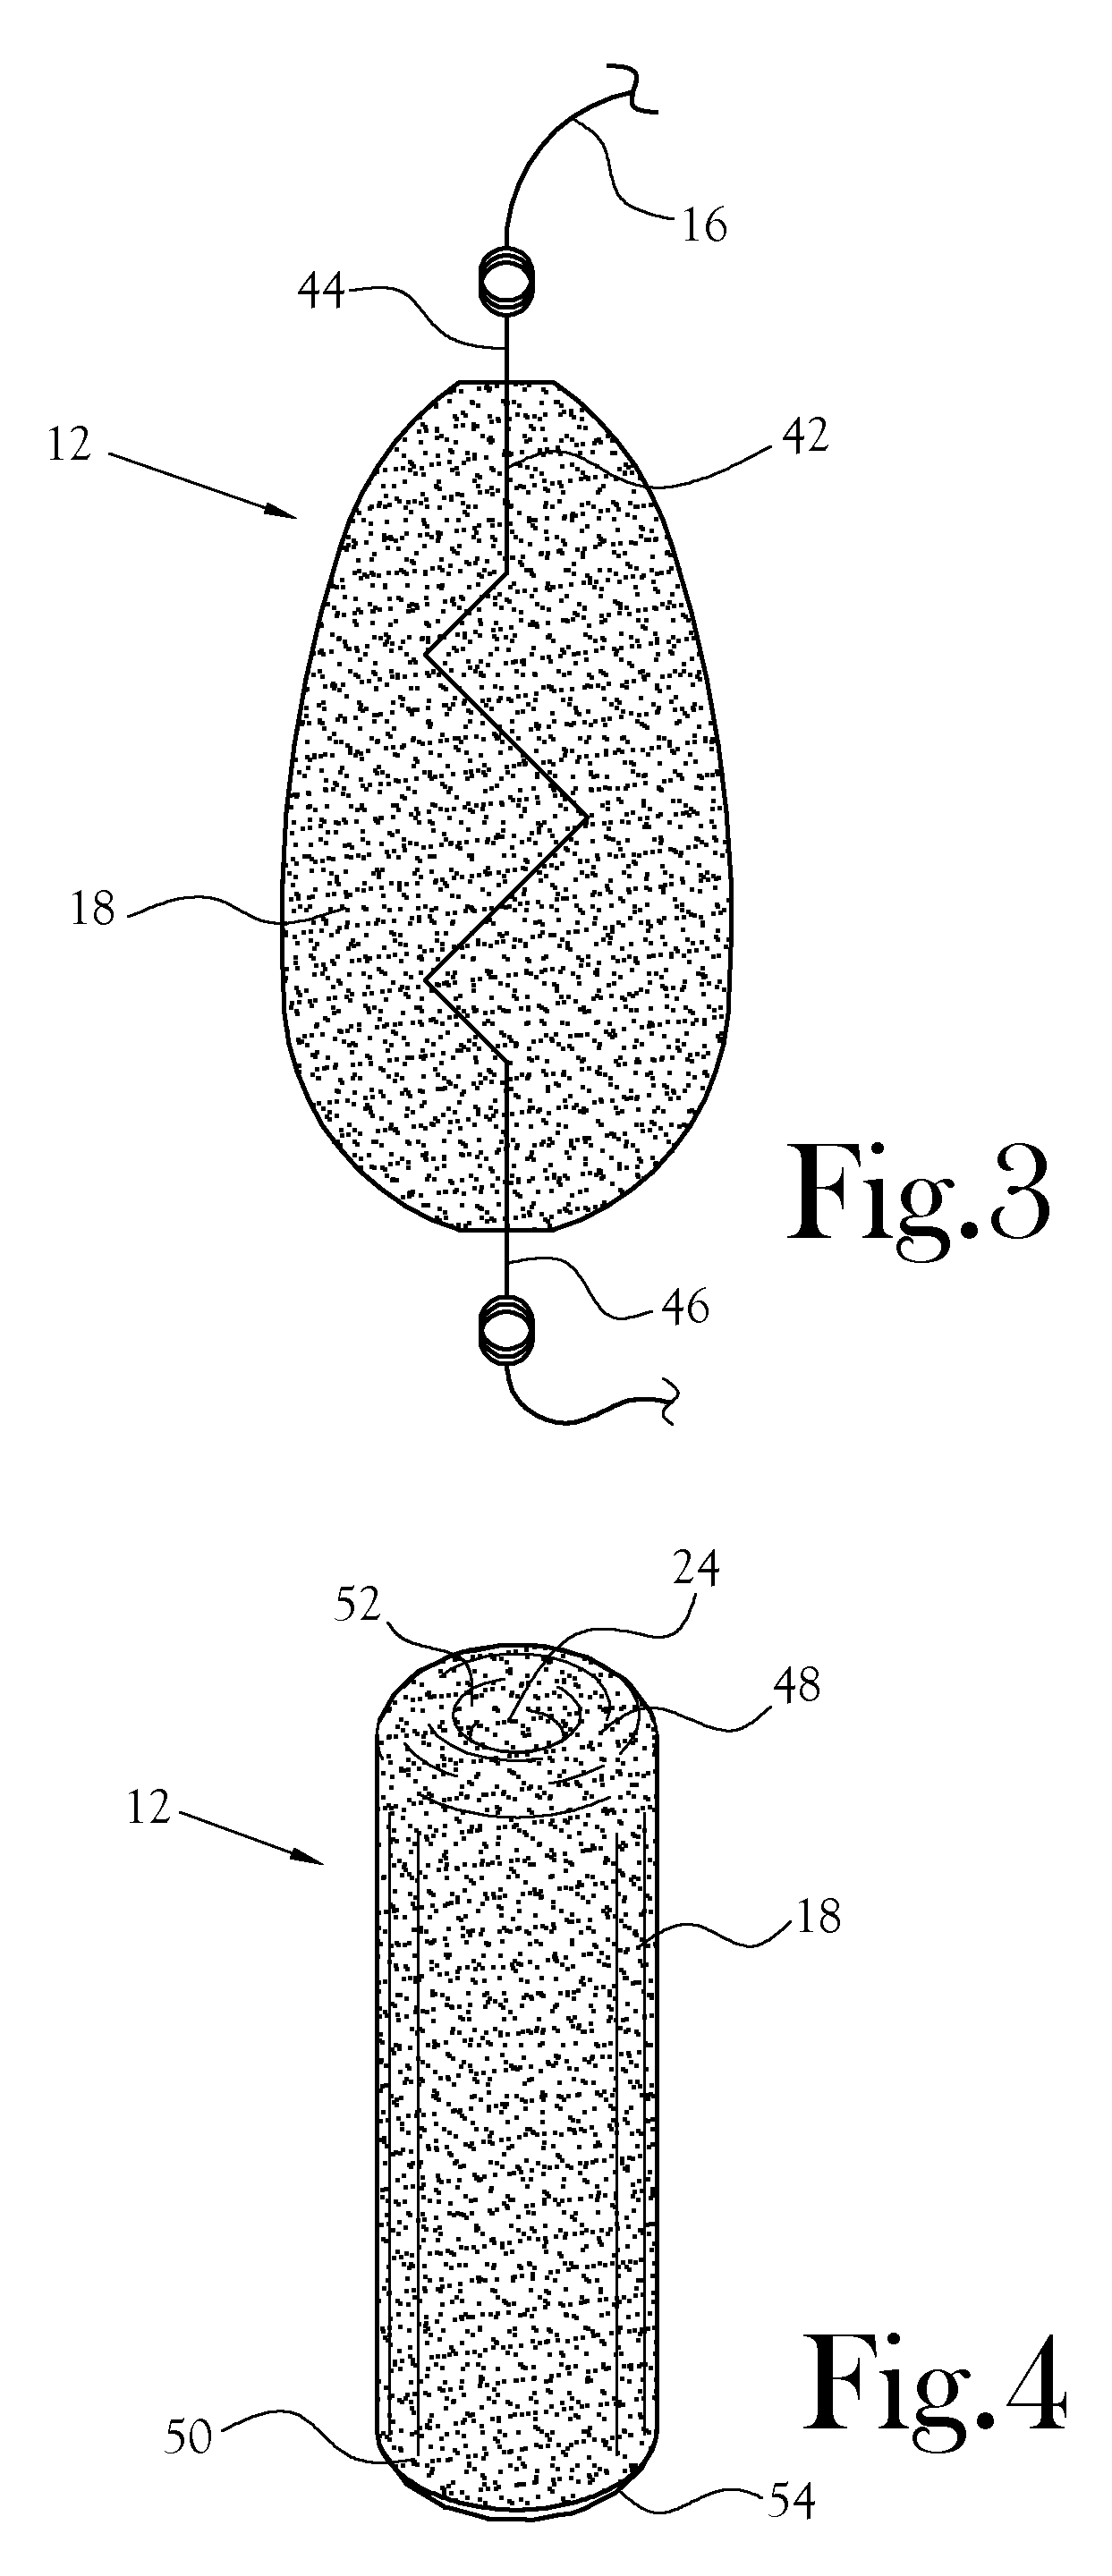 Article of Fishing Tackle and Method of Making Same